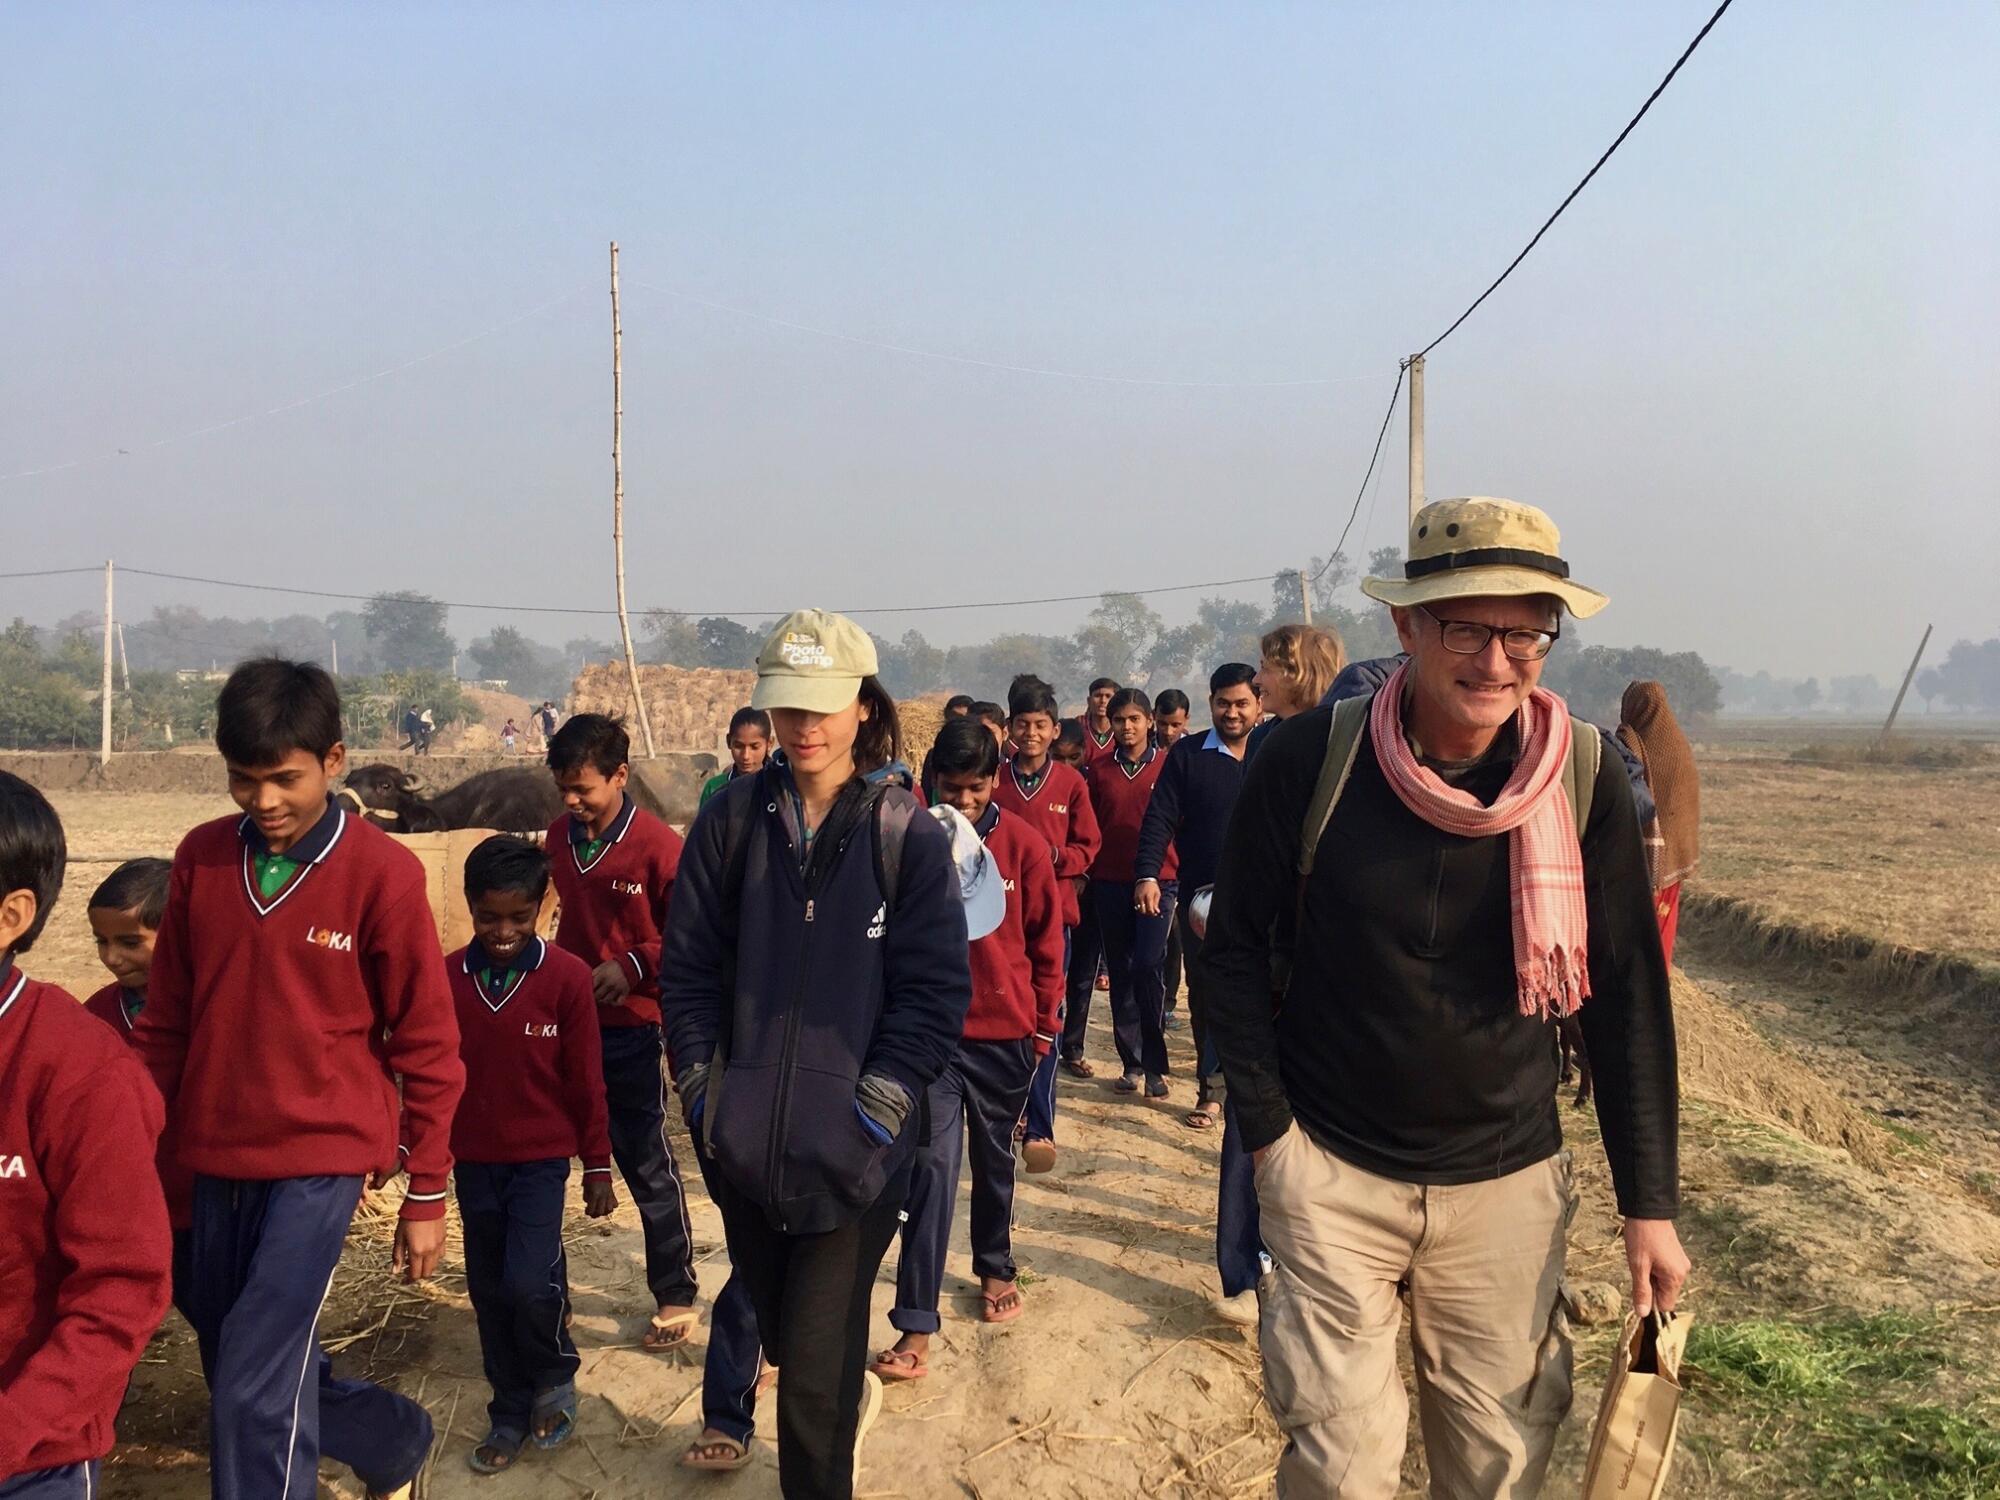 Paul Salopek walks with students in red jumpers while visiting a school in Bihar, India. 